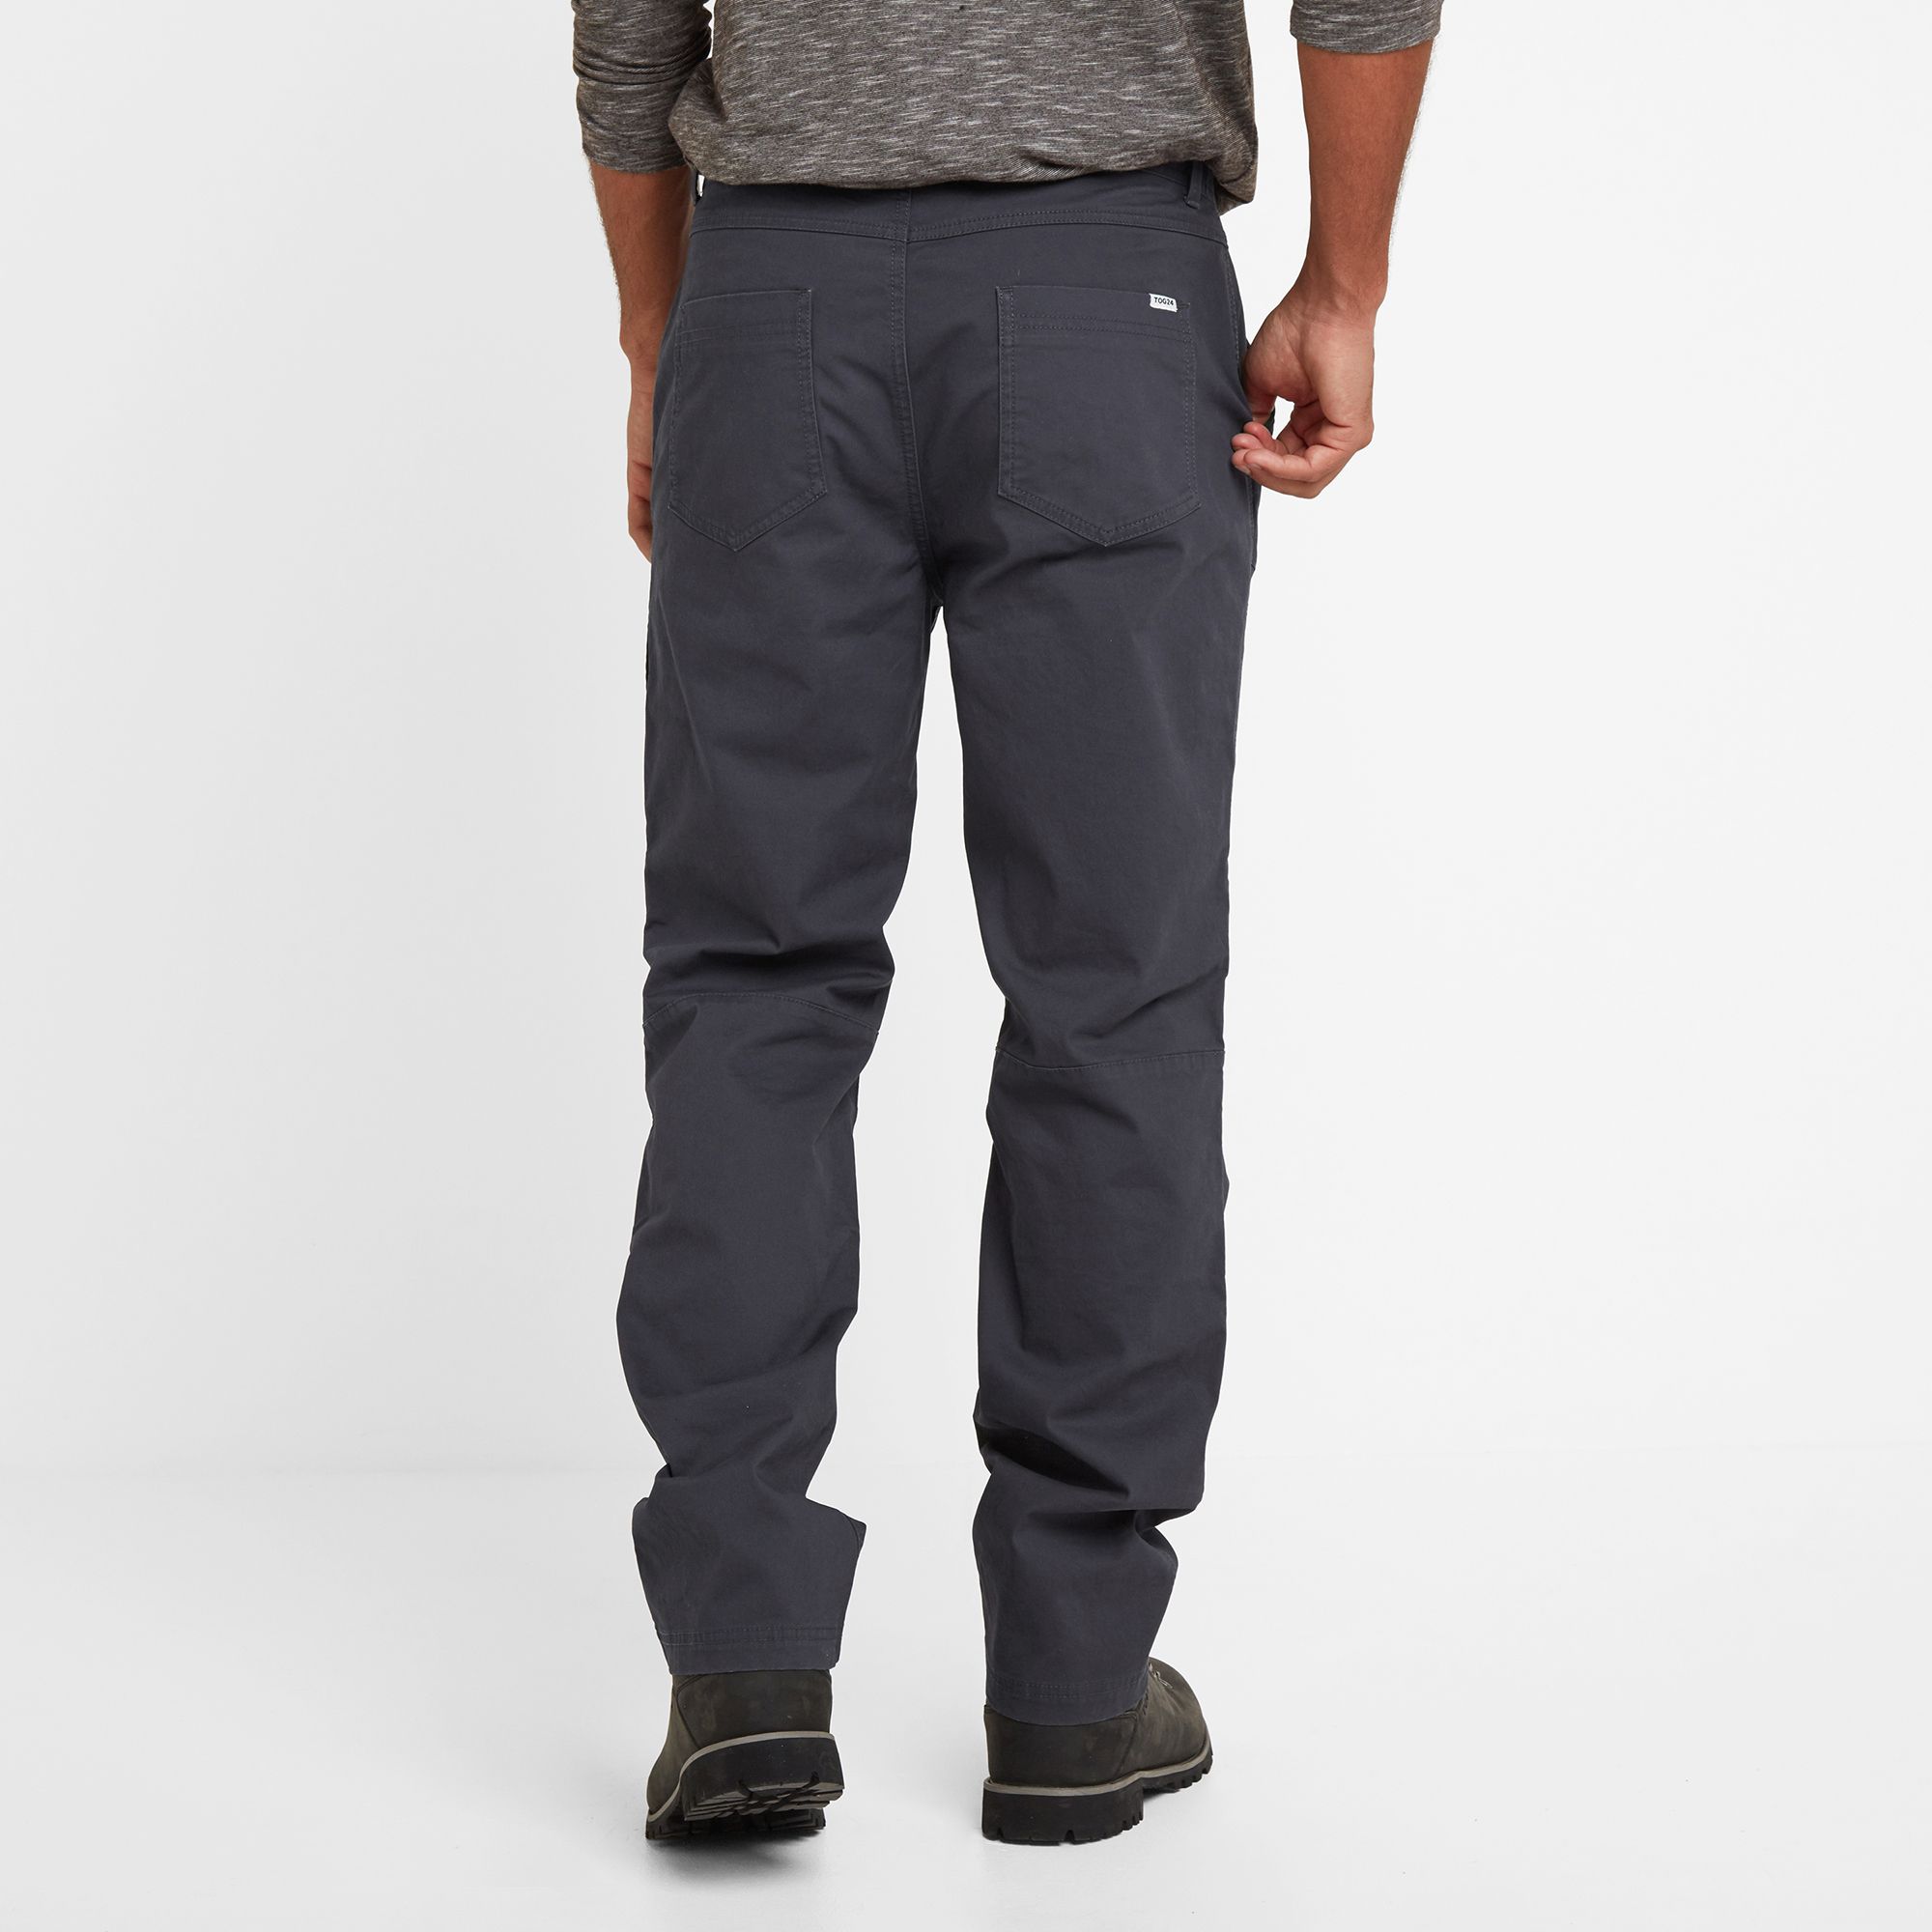 All the comfort of well designed walking trousers, with the looks of casual cotton trousers. Designed with long walks over the Yorkshire moors in mind, they'll also let you go straight from your hike into the pub for a pint and feel perfectly at home. The cut is shaped for ease of walking with a hem that can be worn down or rolled up. Lots of useful pockets means you have a place for your keys, phone map and wallet so you can travel light. As part of our commitment to the environment, the cotton is sustainably grown,  and our ethos of Truth Over Glory is evident in the TOG24 branding on the buttons and small woven label on the back.